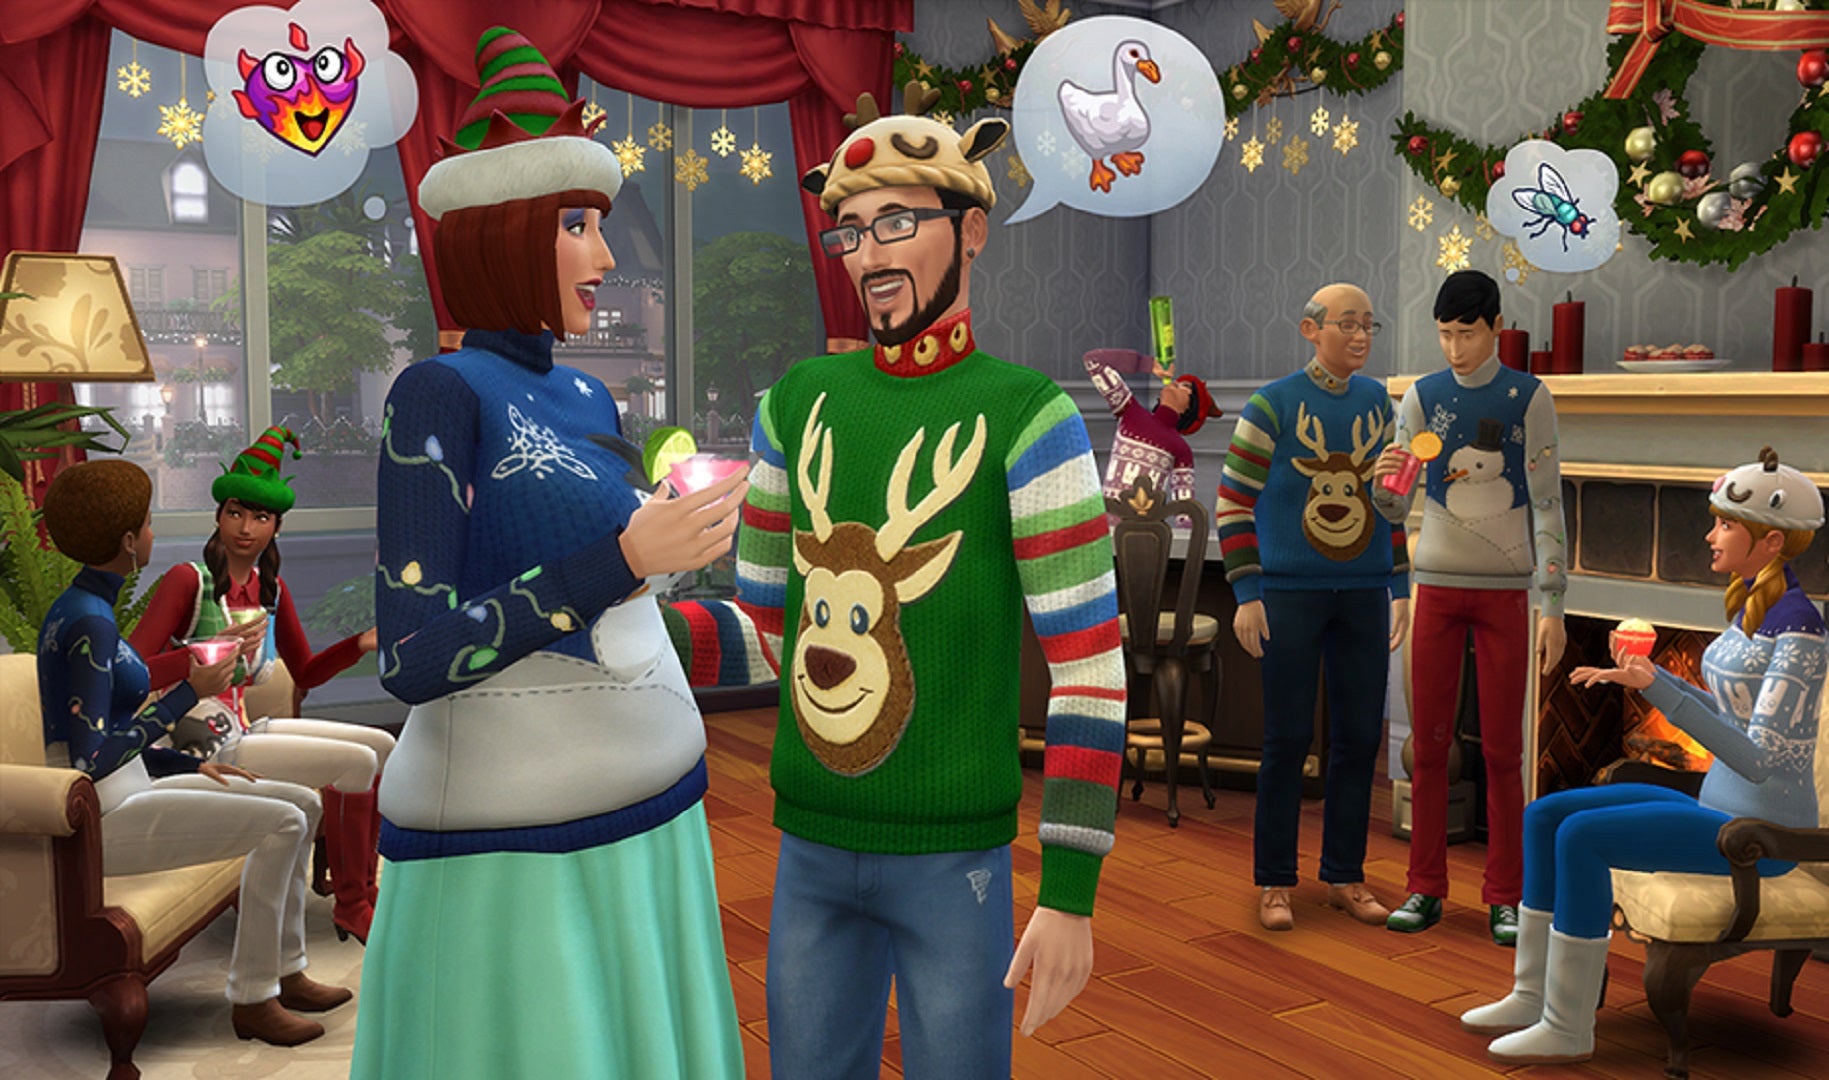 A group of Sims from The Sims 4 in festive attire, apparently enjoying a Christmas party.